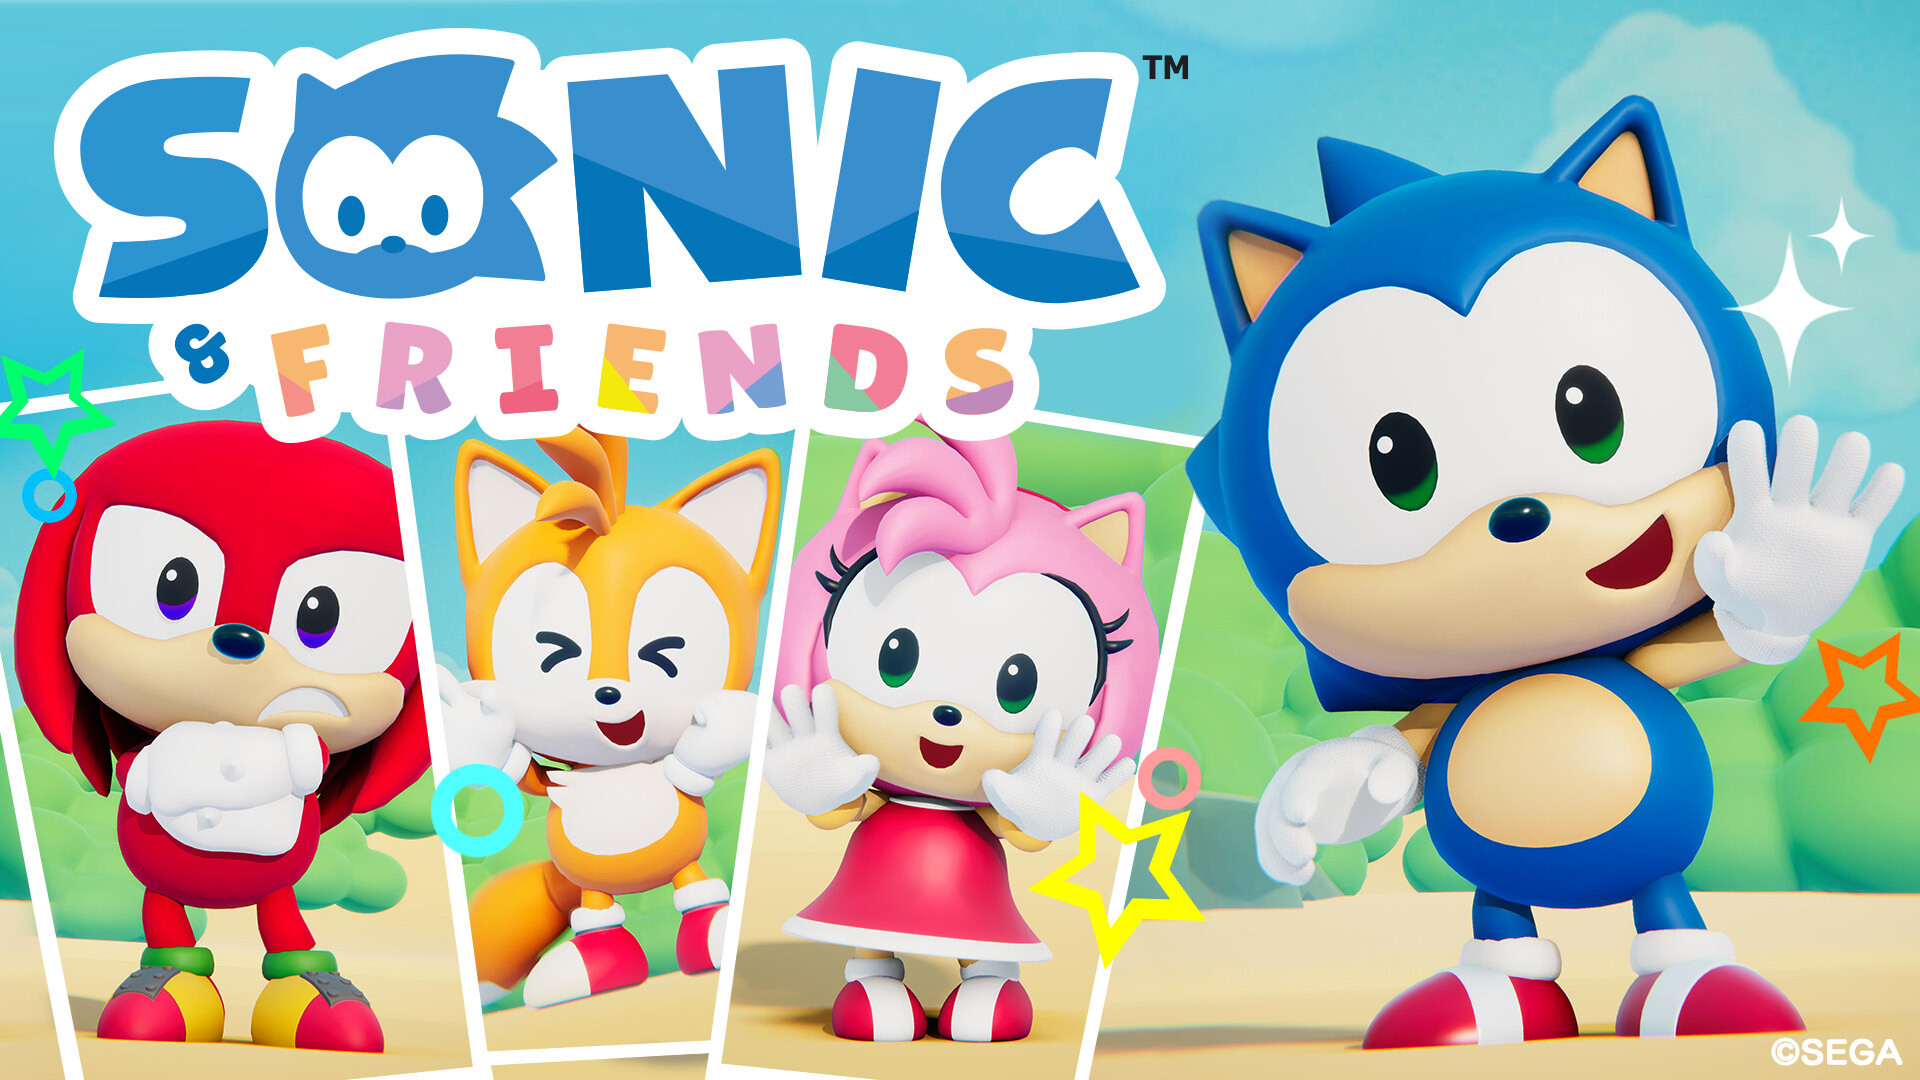 Sonic & Friends' is a New Animated Series, Here's the Official Reveal  Teaser - Media - Sonic Stadium